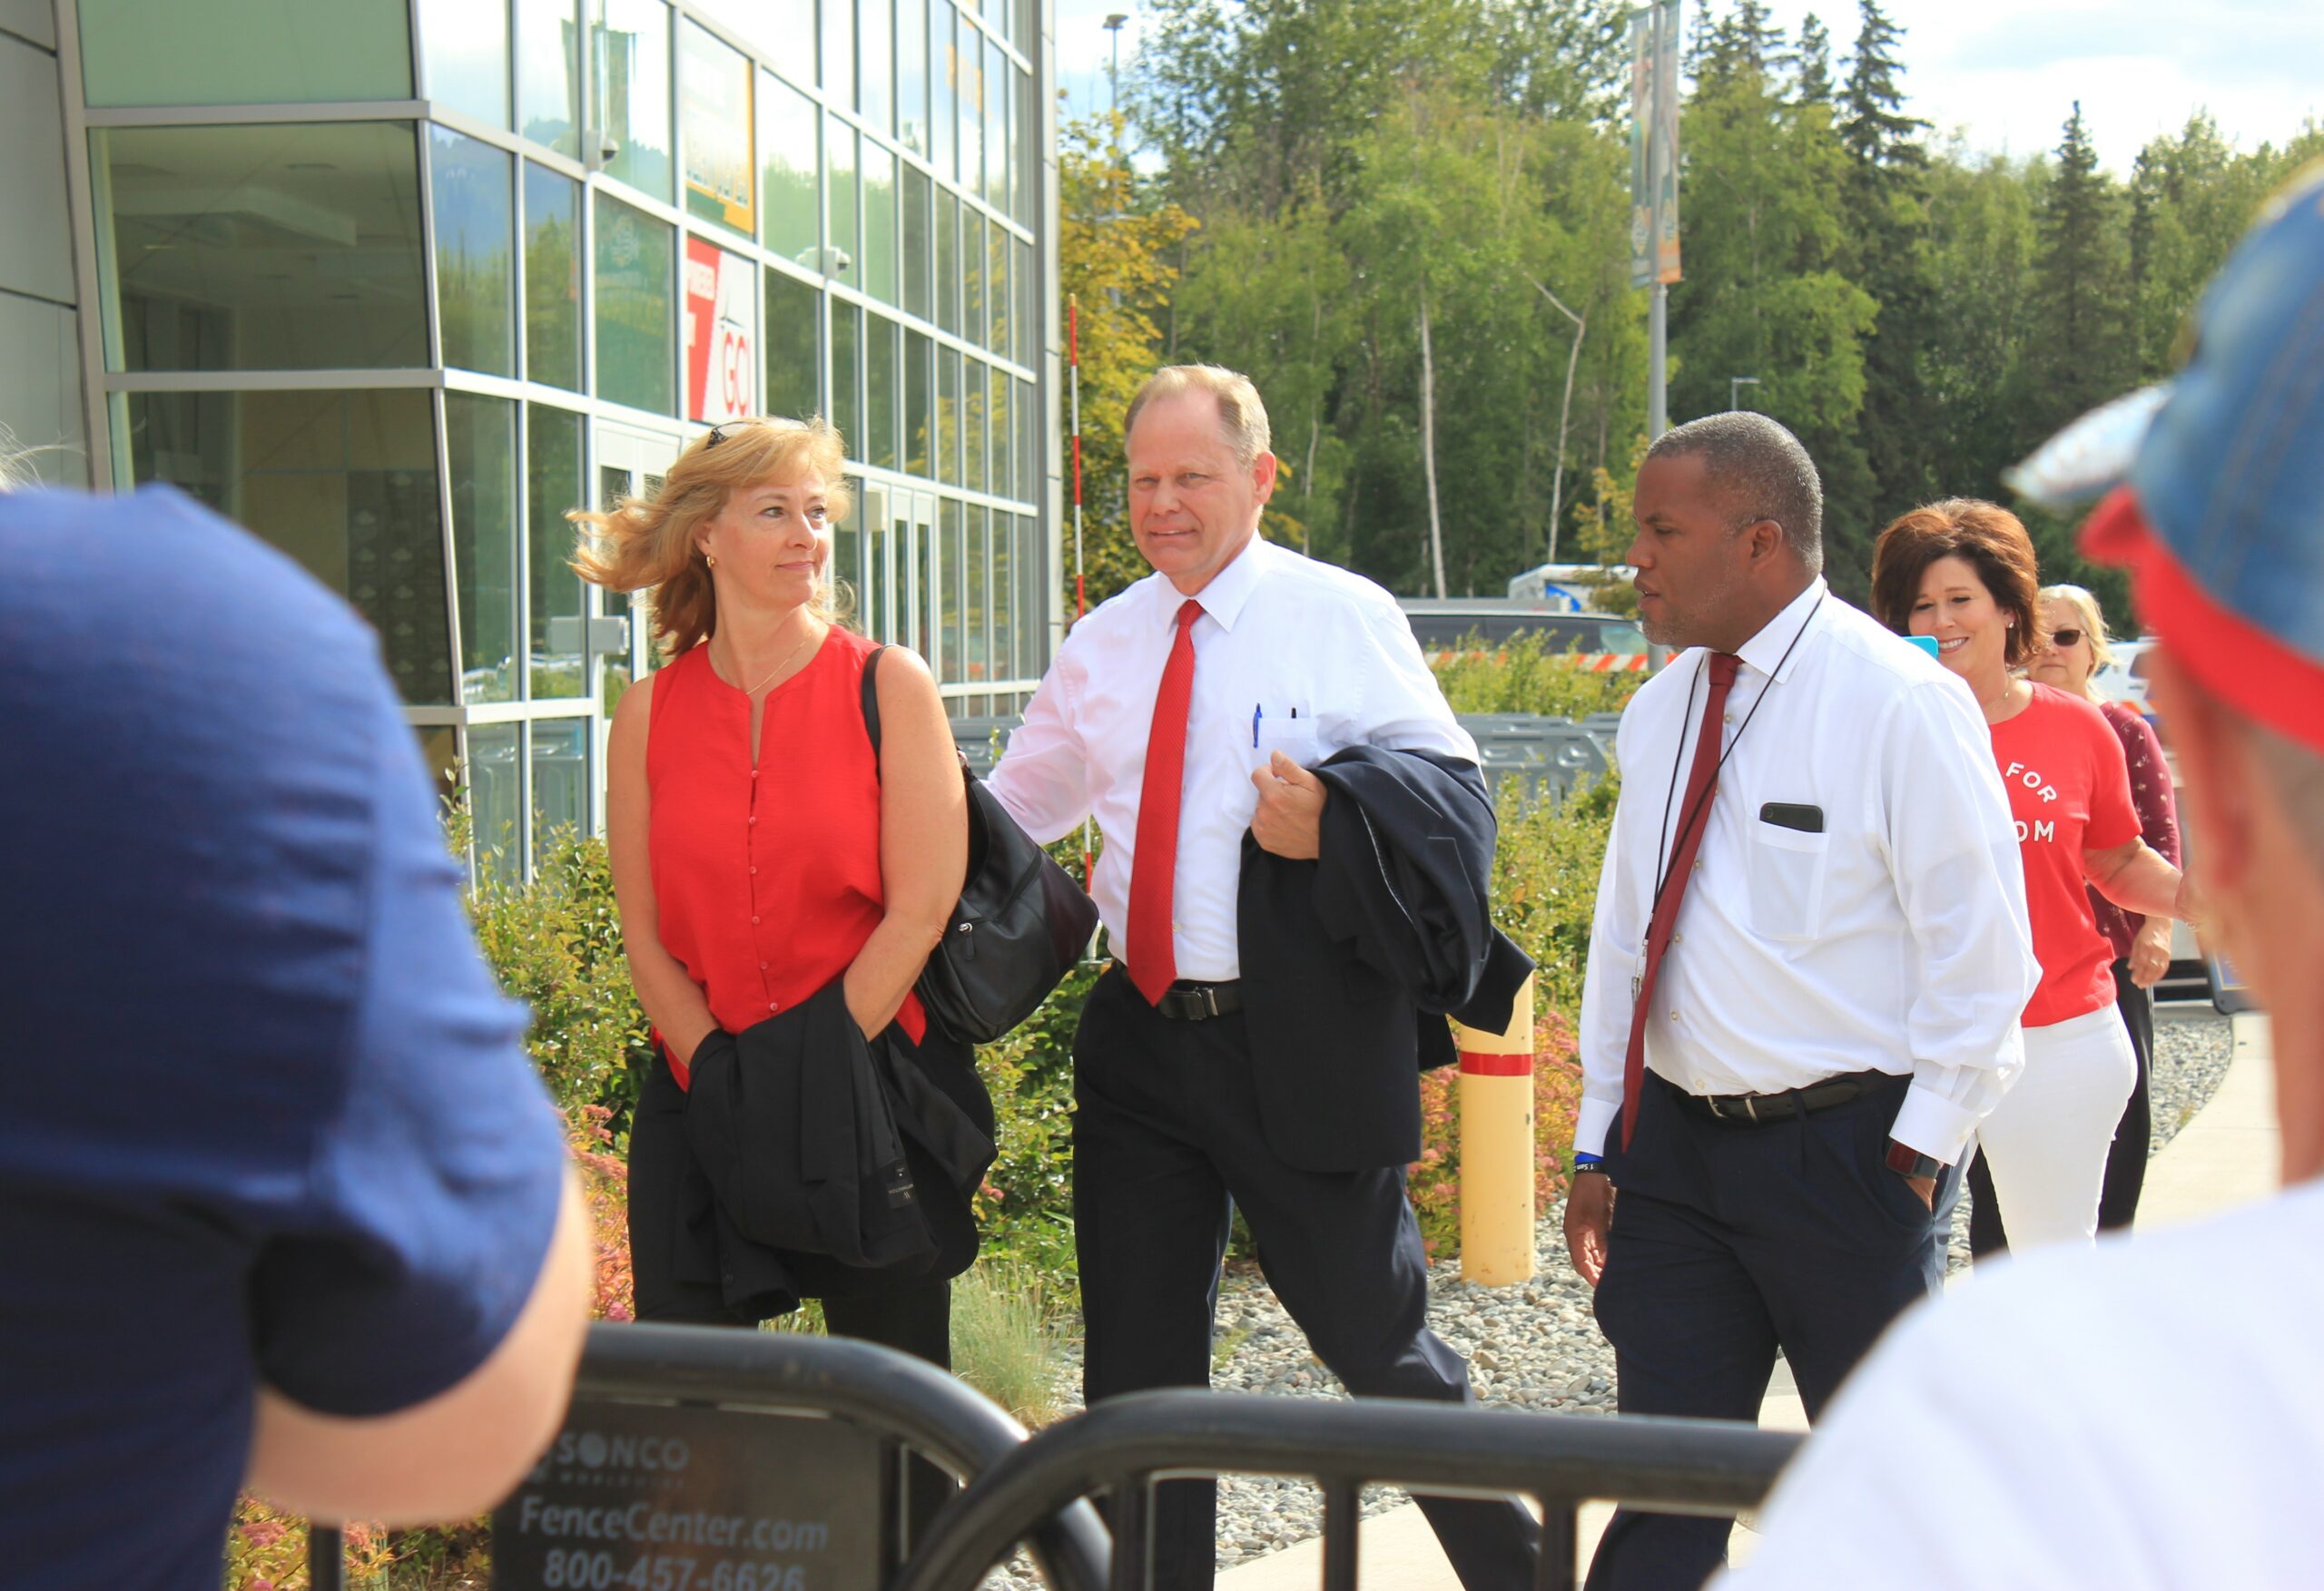 Two men in ties and a woman in a red dress walk into a building